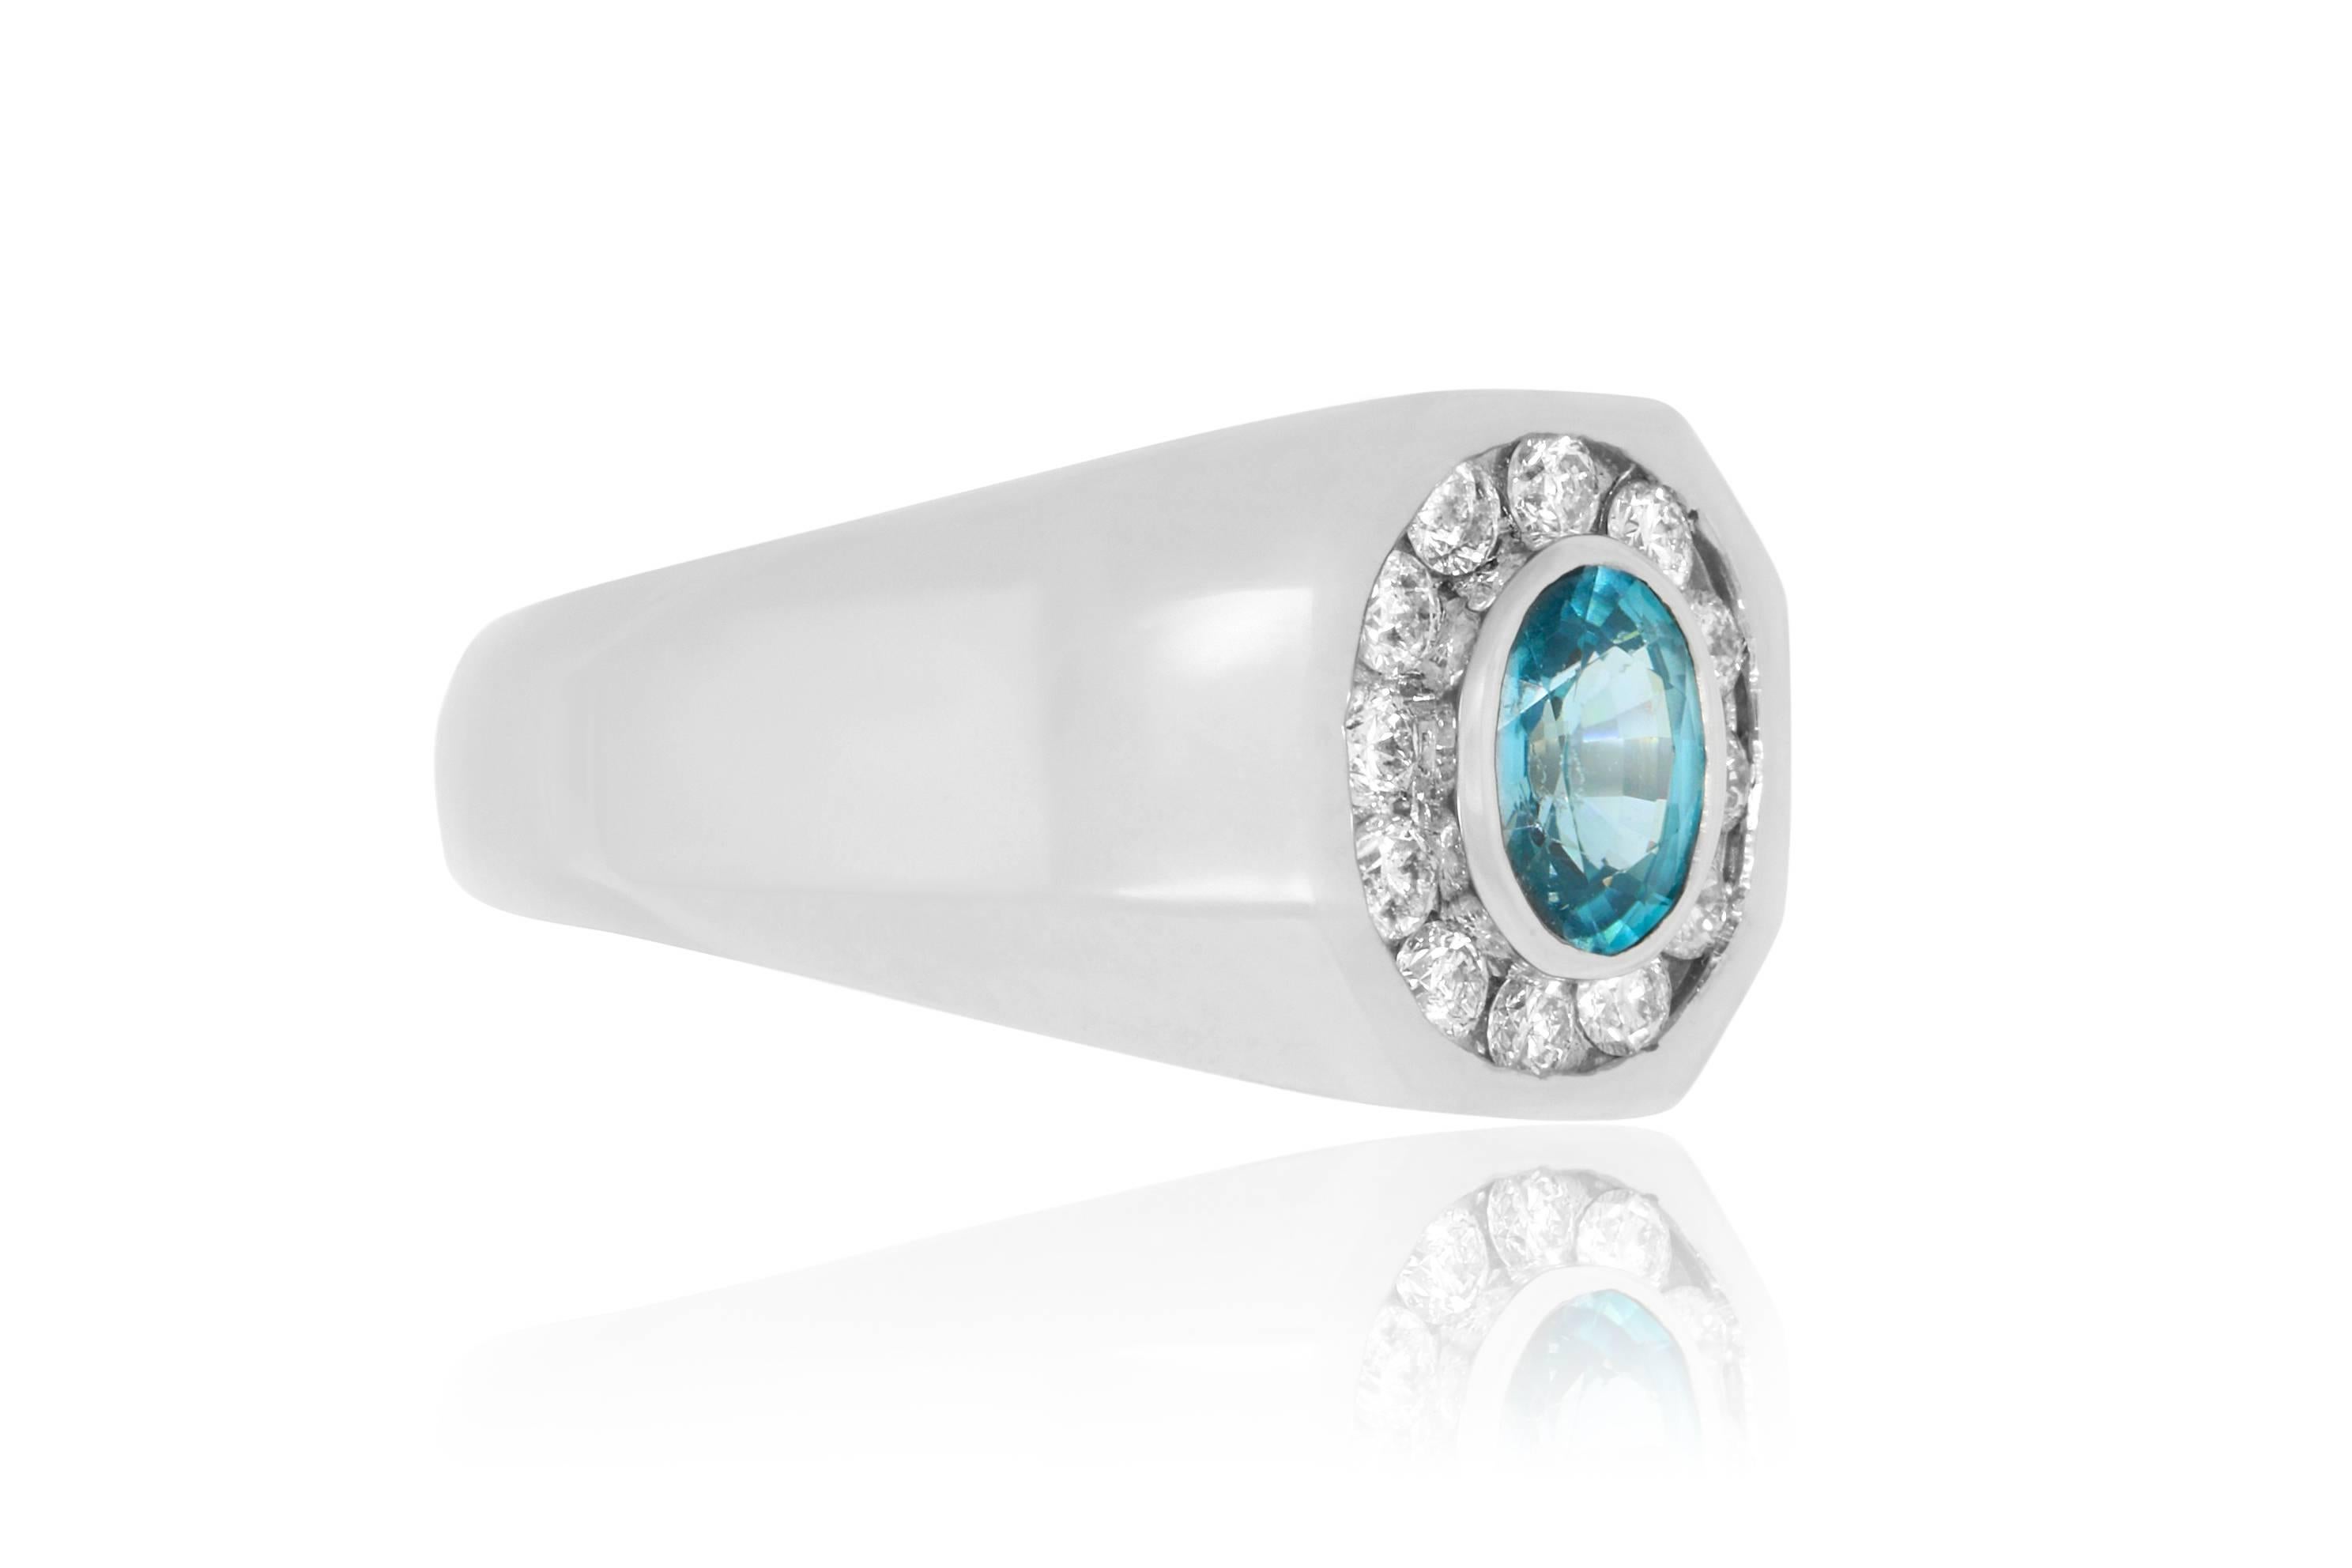 A birthstone for December!

Material: 14k White Gold
Colored Diamond:: 1 Oval Blue Zircon at 1.24 carats.
Diamonds: 12 Round White Diamonds at 0.50 carats. SI Clarity / H-I Color. 
Ring Size: 10. Alberto offers complimentary sizing on all